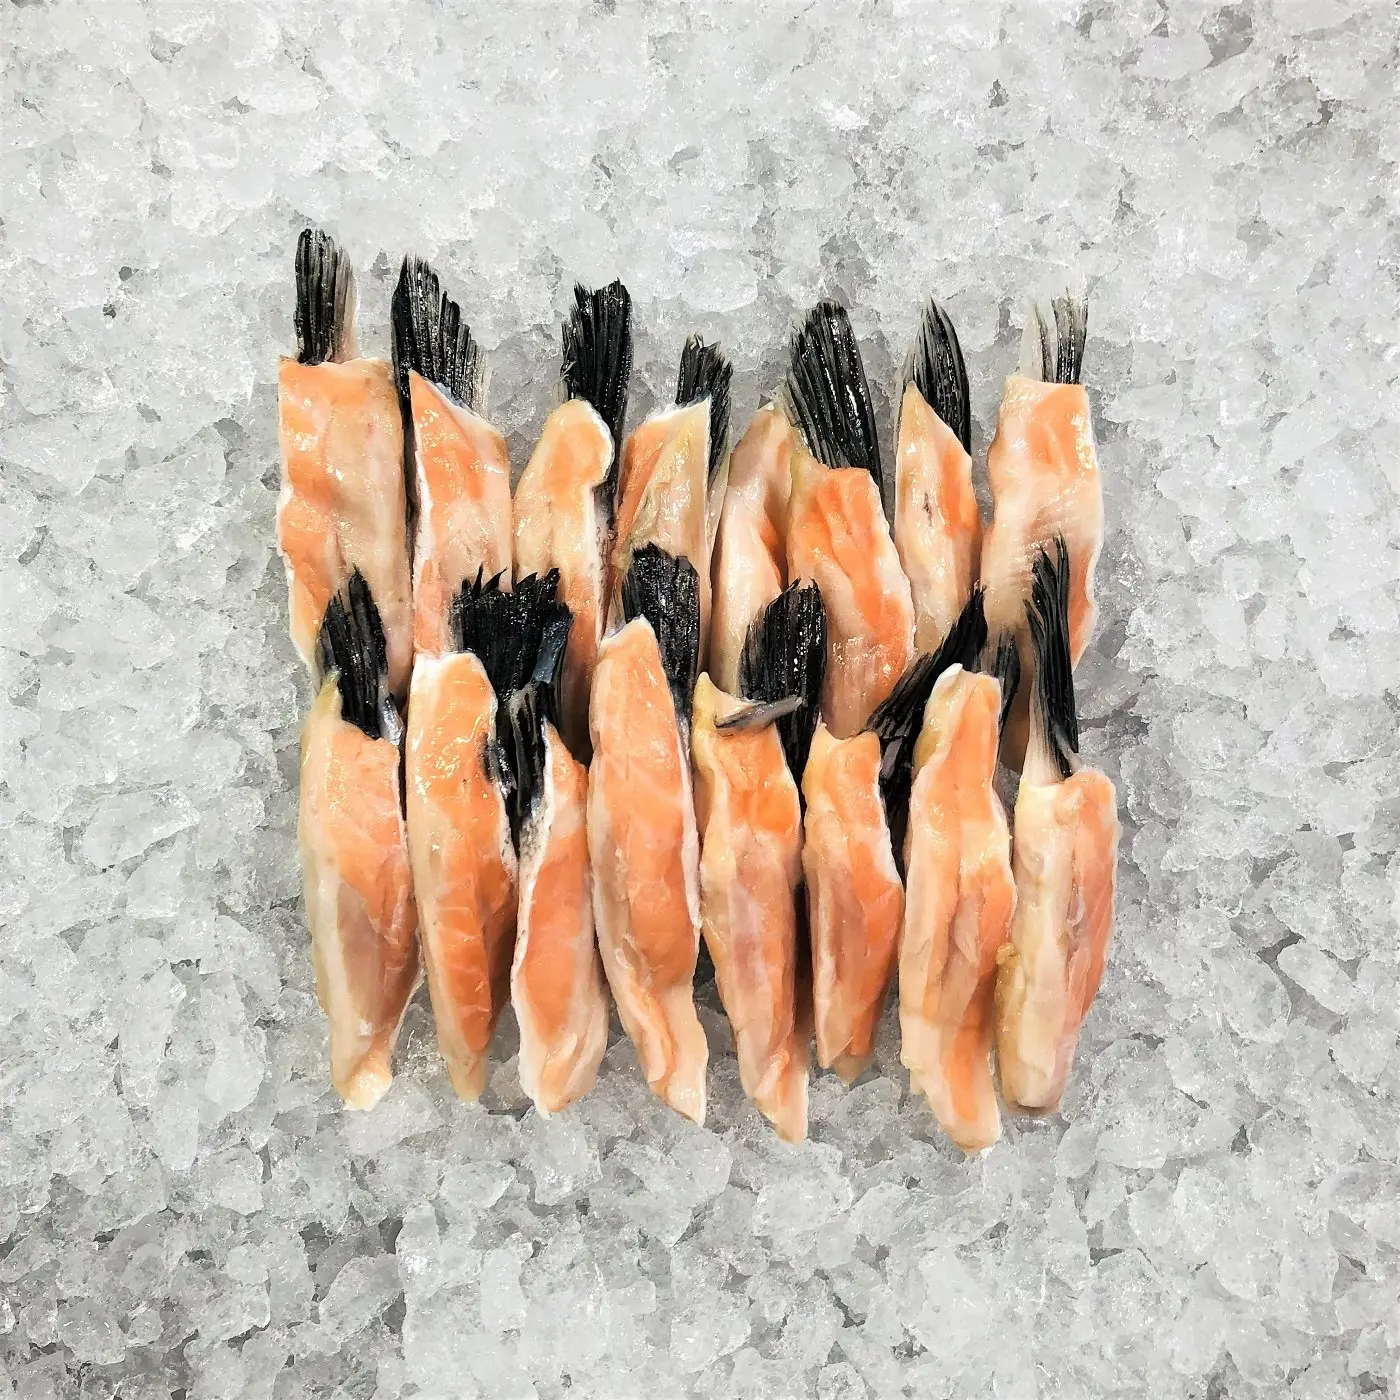 smoked salmon fins - Can you eat salmon fins